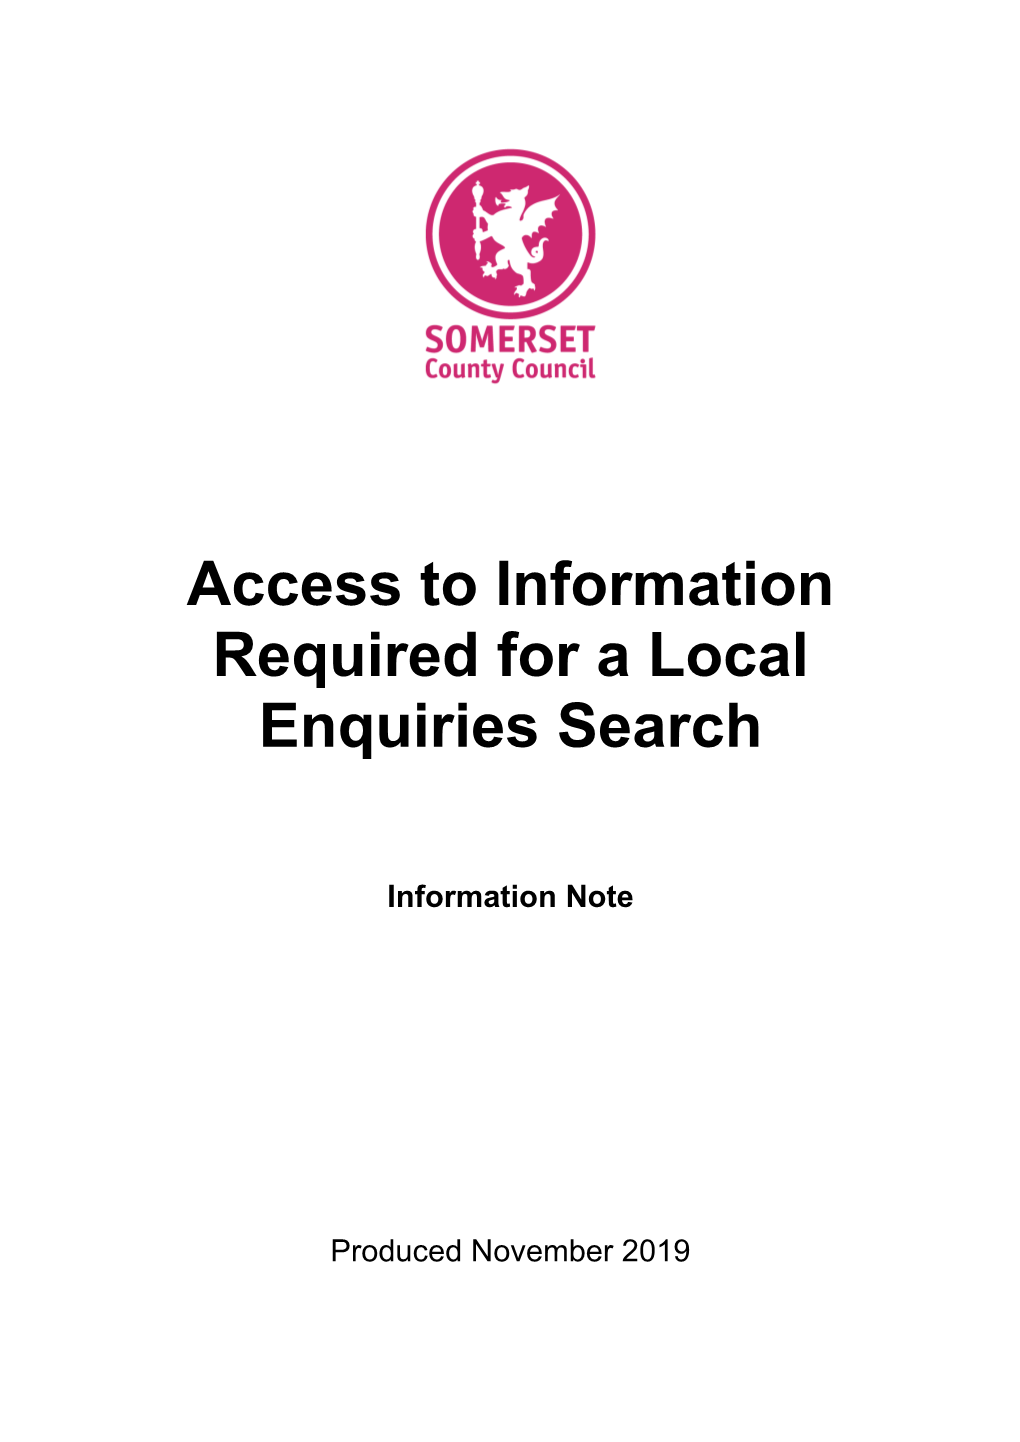 Access to Information Required for a Local Enquiries Search